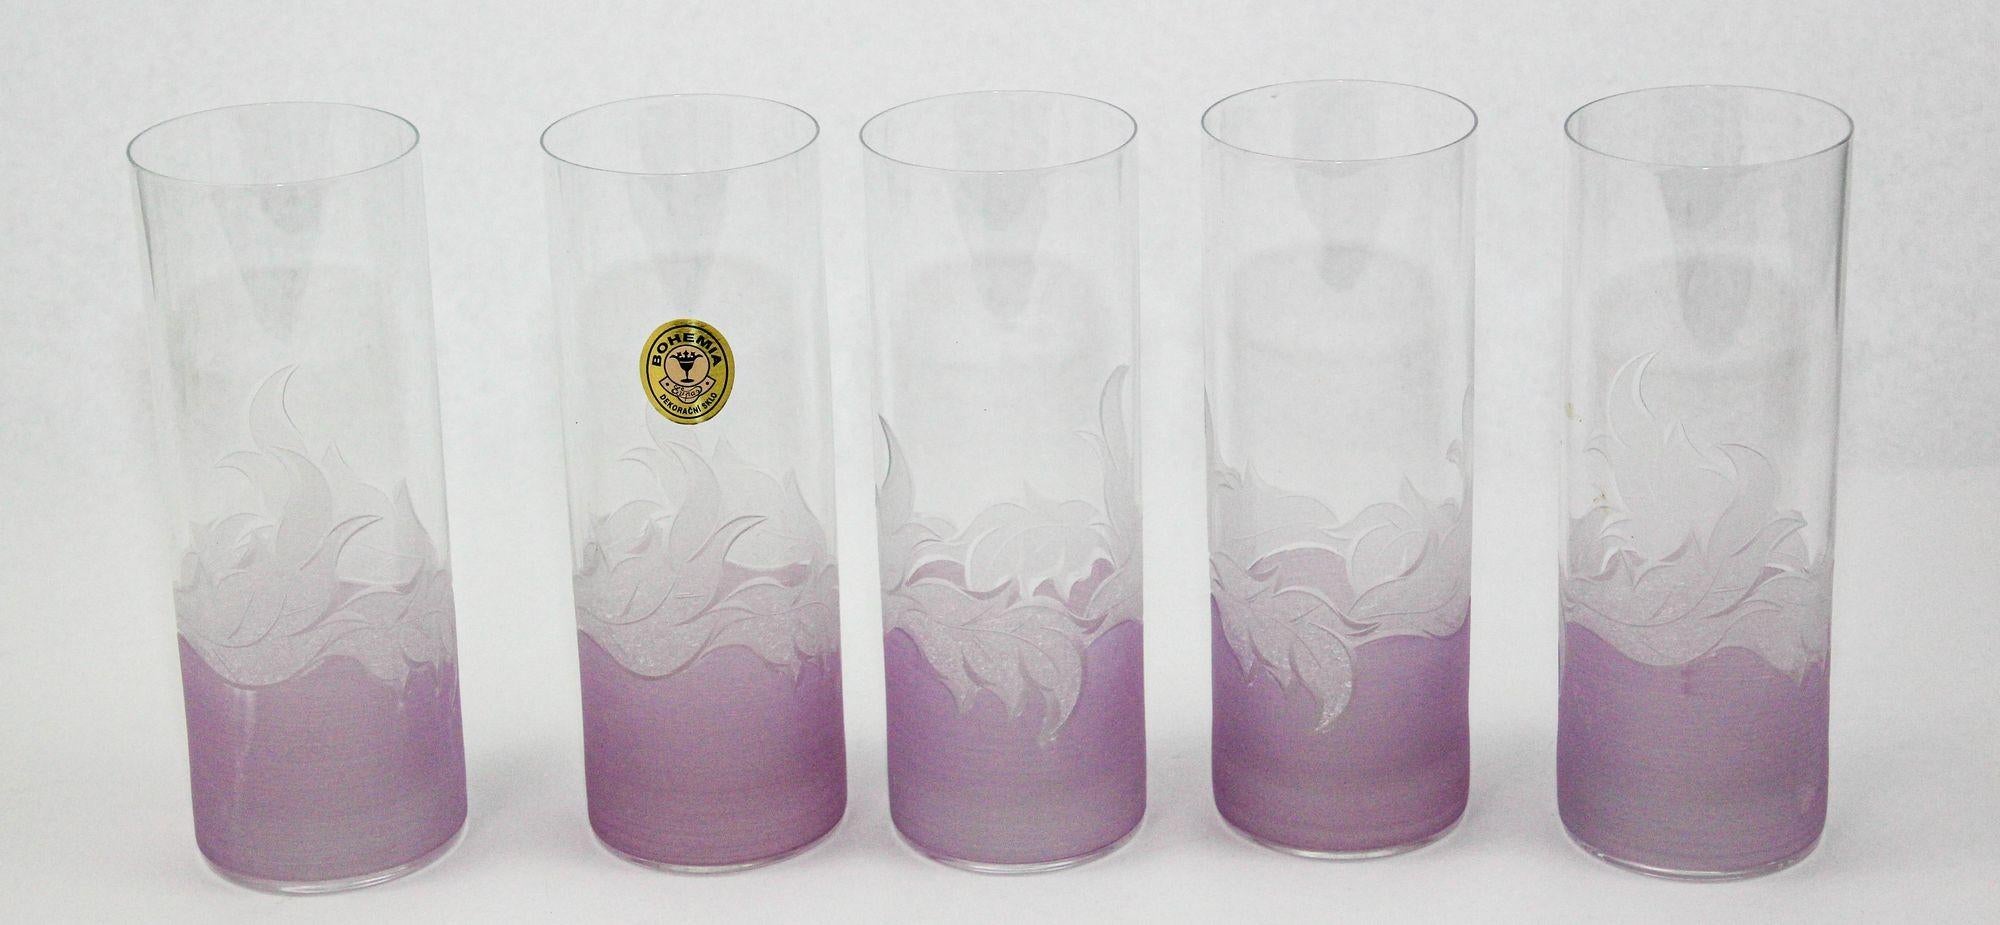 Mouthblown, hand-engraved crystal glass, very light and delicate set of 5 tumbler highball glasses.
Serve up classic and chilled cocktails in this Bohemia highball glasses in a lavender frosted color foliage bottom design.
This tall, narrow glasses